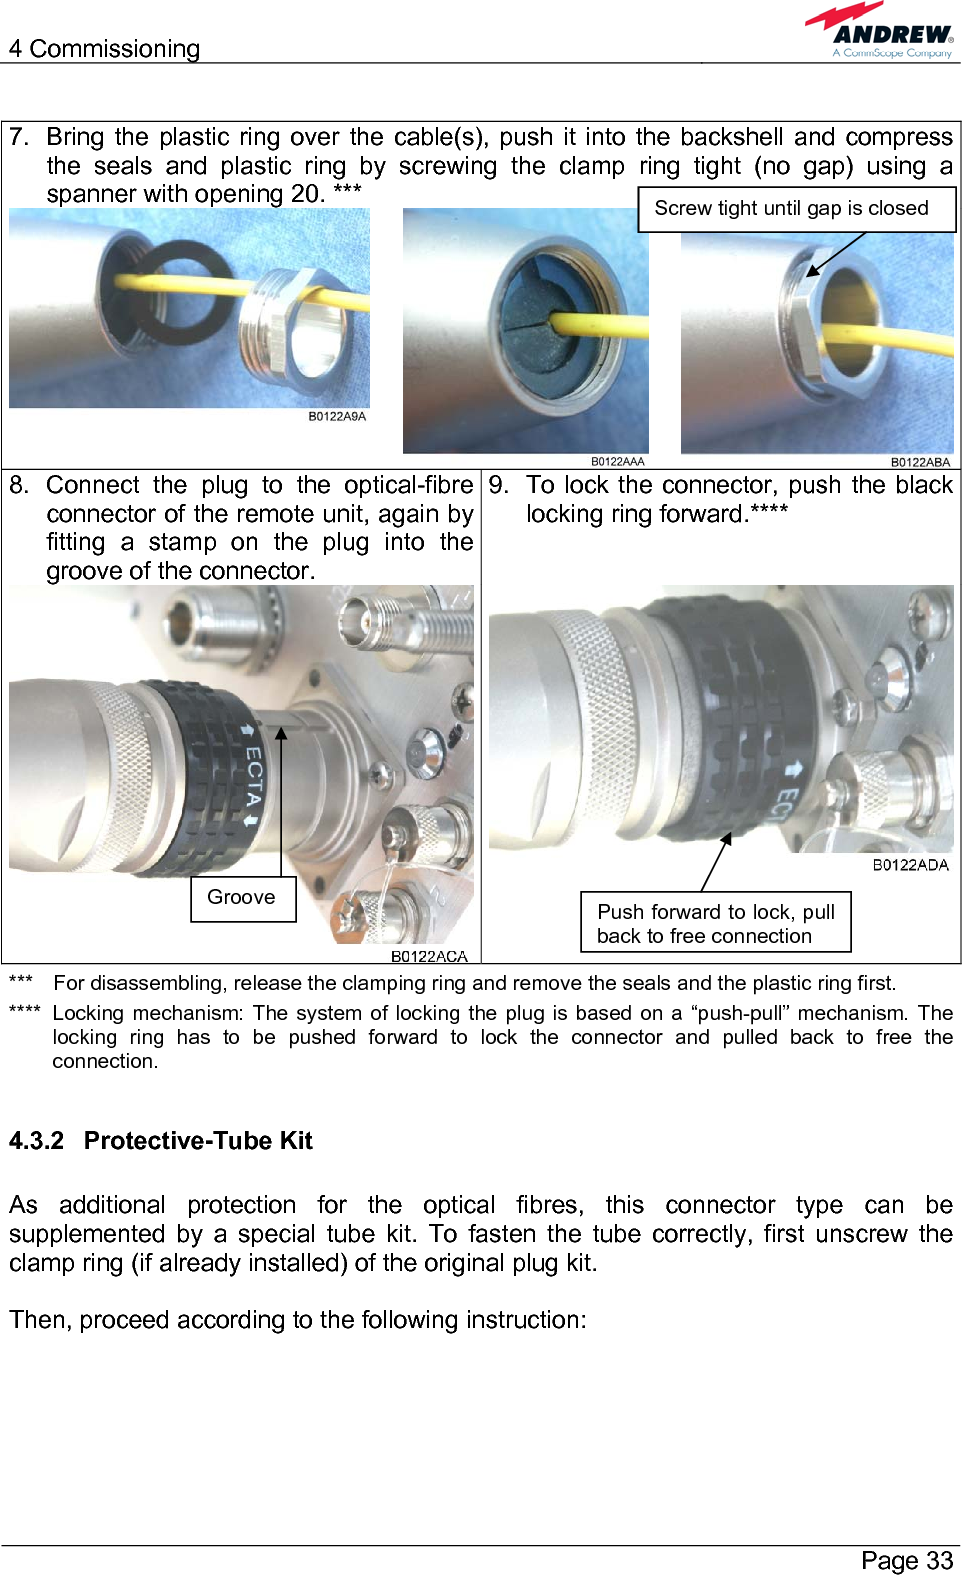 4 Commissioning       Page 33  7.  Bring the plastic ring over the cable(s), push it into the backshell and compress the seals and plastic ring by screwing the clamp ring tight (no gap) using a spanner with opening 20. ***   8.  Connect the plug to the optical-fibre connector of the remote unit, again by fitting a stamp on the plug into the groove of the connector.  9.  To lock the connector, push the black locking ring forward.****  ***  For disassembling, release the clamping ring and remove the seals and the plastic ring first. ****  Locking mechanism: The system of locking the plug is based on a “push-pull” mechanism. The locking ring has to be pushed forward to lock the connector and pulled back to free the connection.  4.3.2 Protective-Tube Kit  As additional protection for the optical fibres, this connector type can be supplemented by a special tube kit. To fasten the tube correctly, first unscrew the clamp ring (if already installed) of the original plug kit.   Then, proceed according to the following instruction:  Groove  Push forward to lock, pull back to free connection Screw tight until gap is closed 